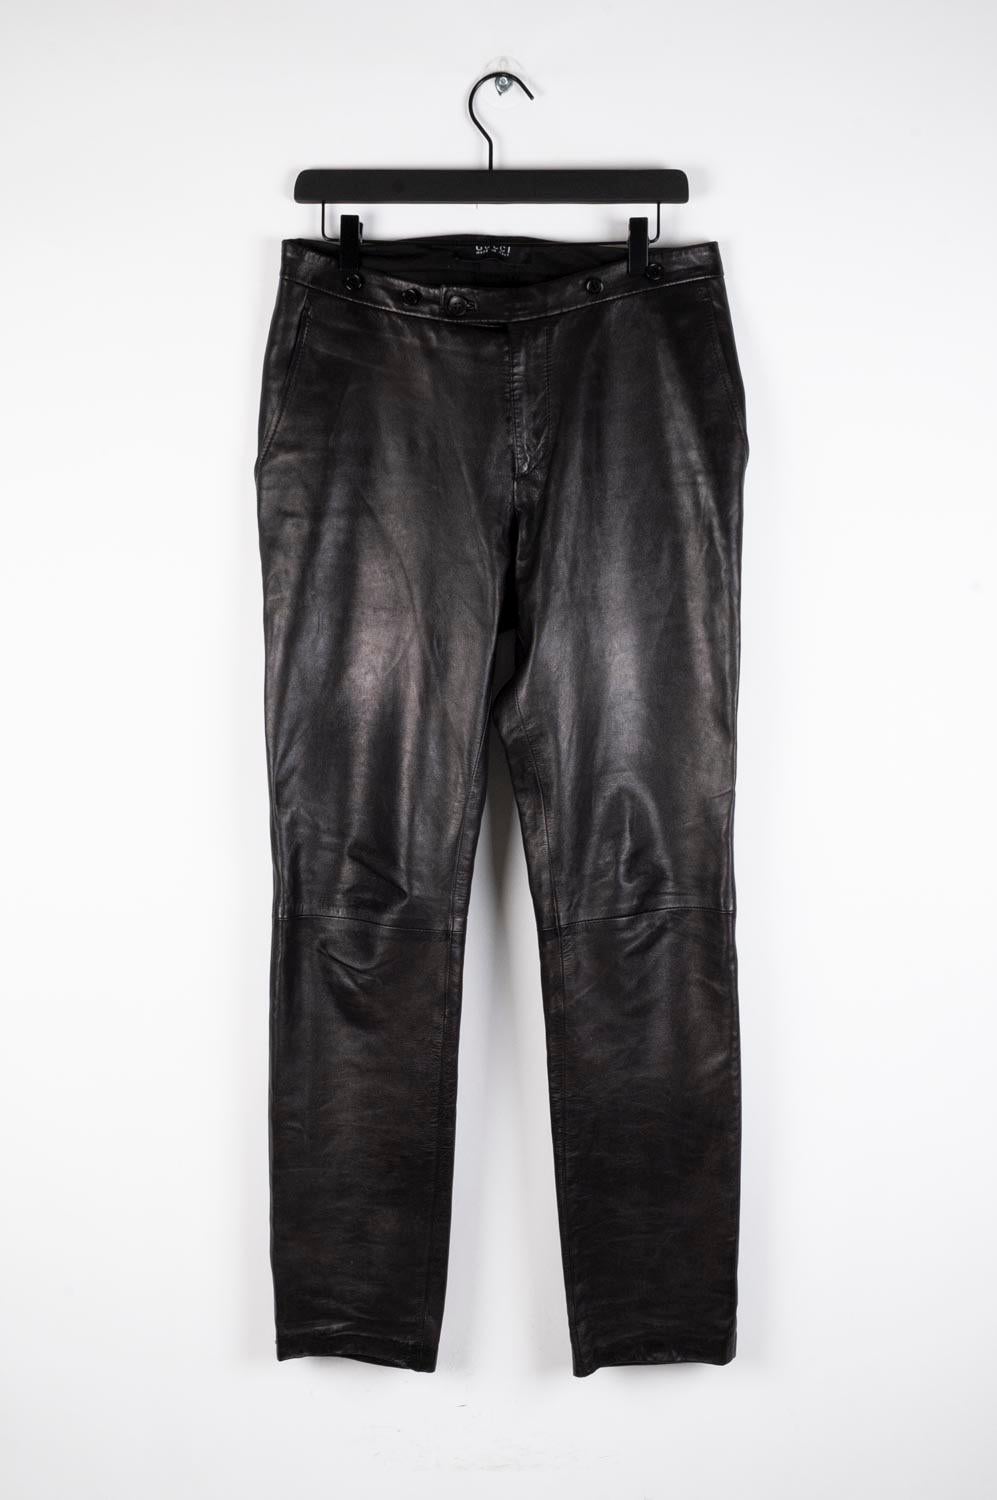 Gucci Leather Men Pants with suspenders Size 48 (M/L) For Sale 4